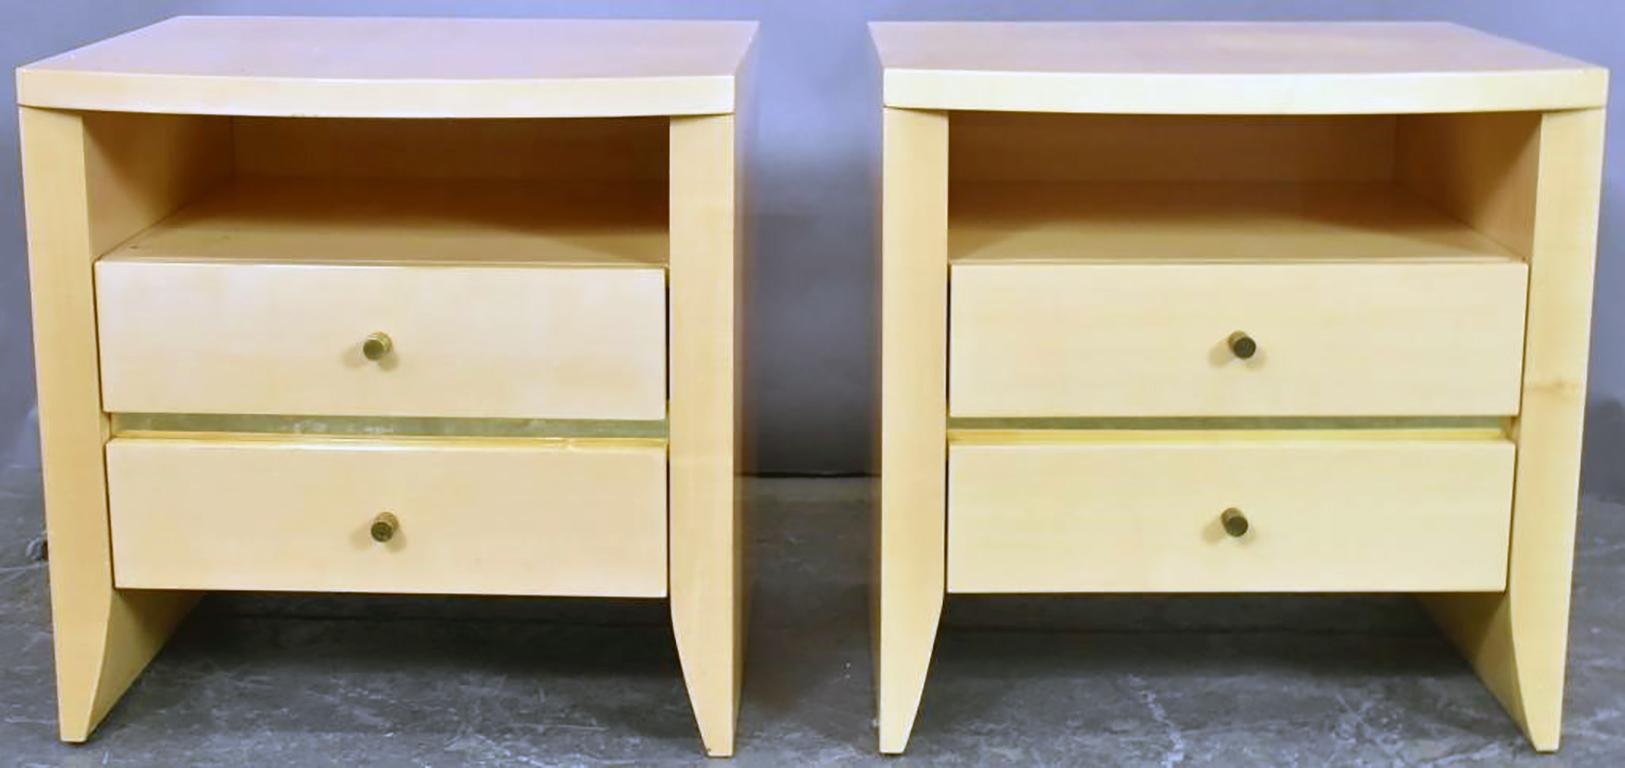 Chic pair of nightstands or end tables with curved tops, a convenient open area above a pair of drawers in a soft yellow lacquer with brass details by J.C. Maley.